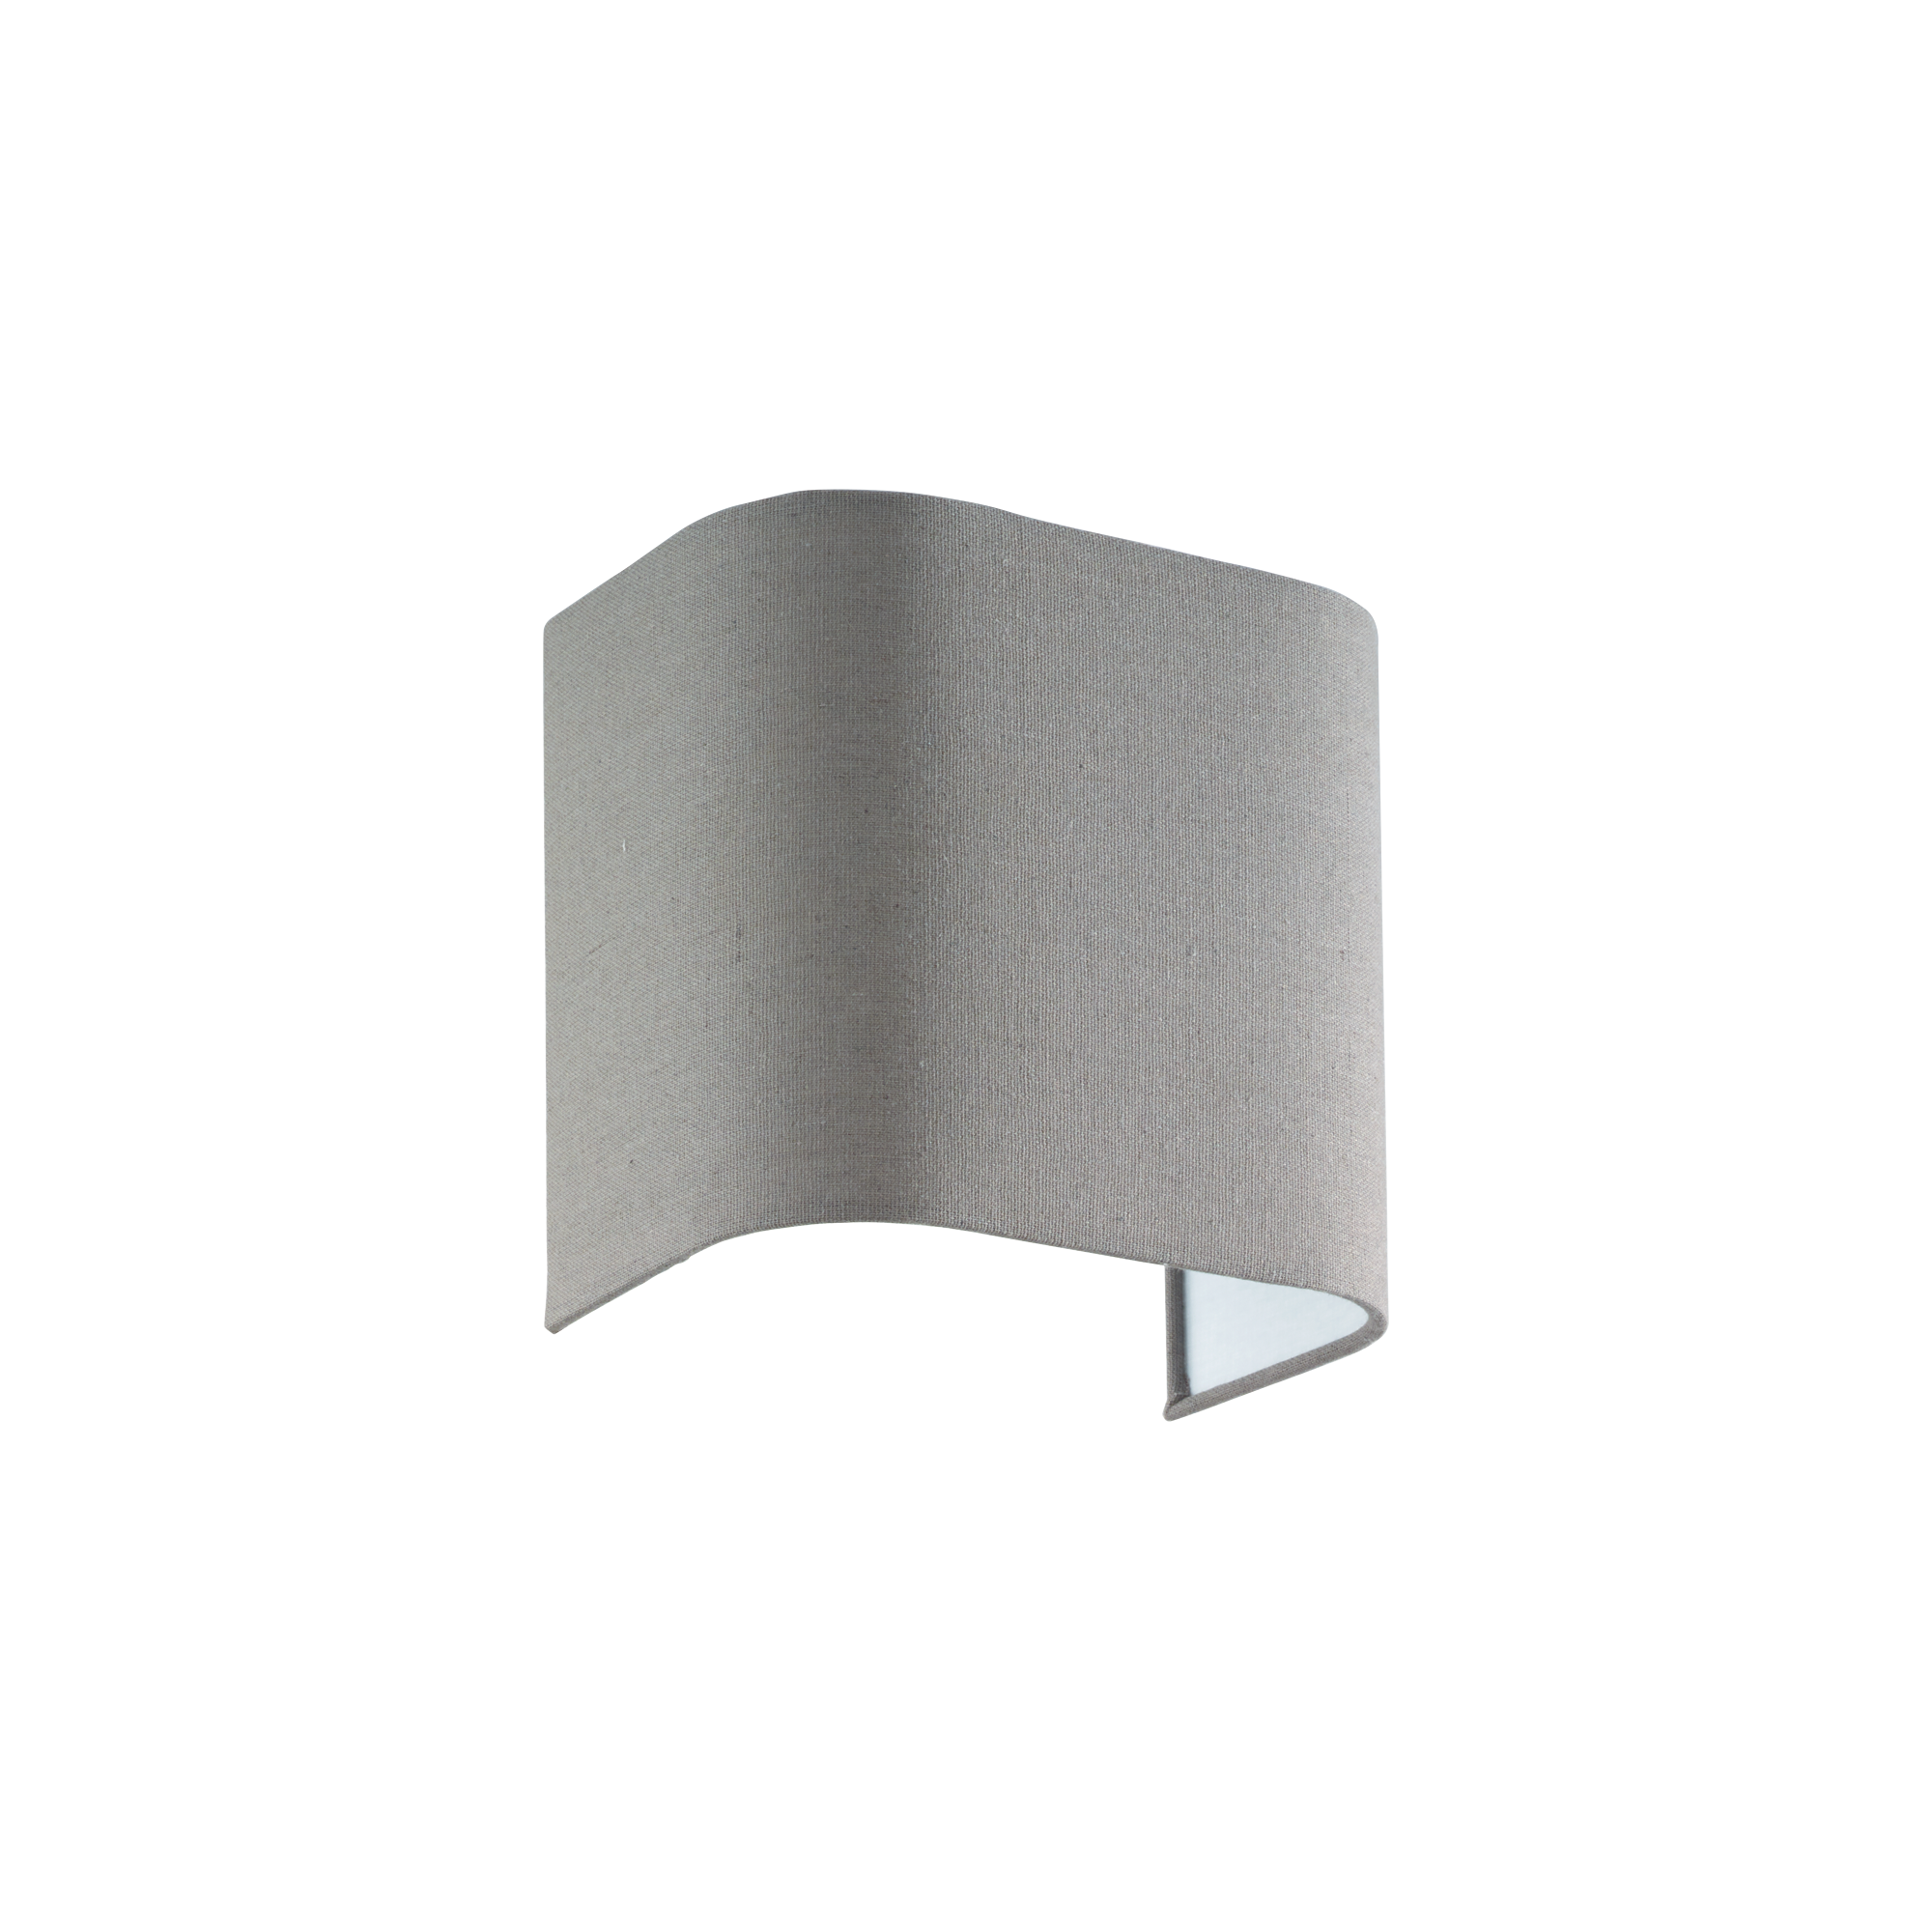 Ideal Lux 239613,Category_Wall Lights,MODERNO,Finish_ GEA PARALUME AP2 GRIGIO